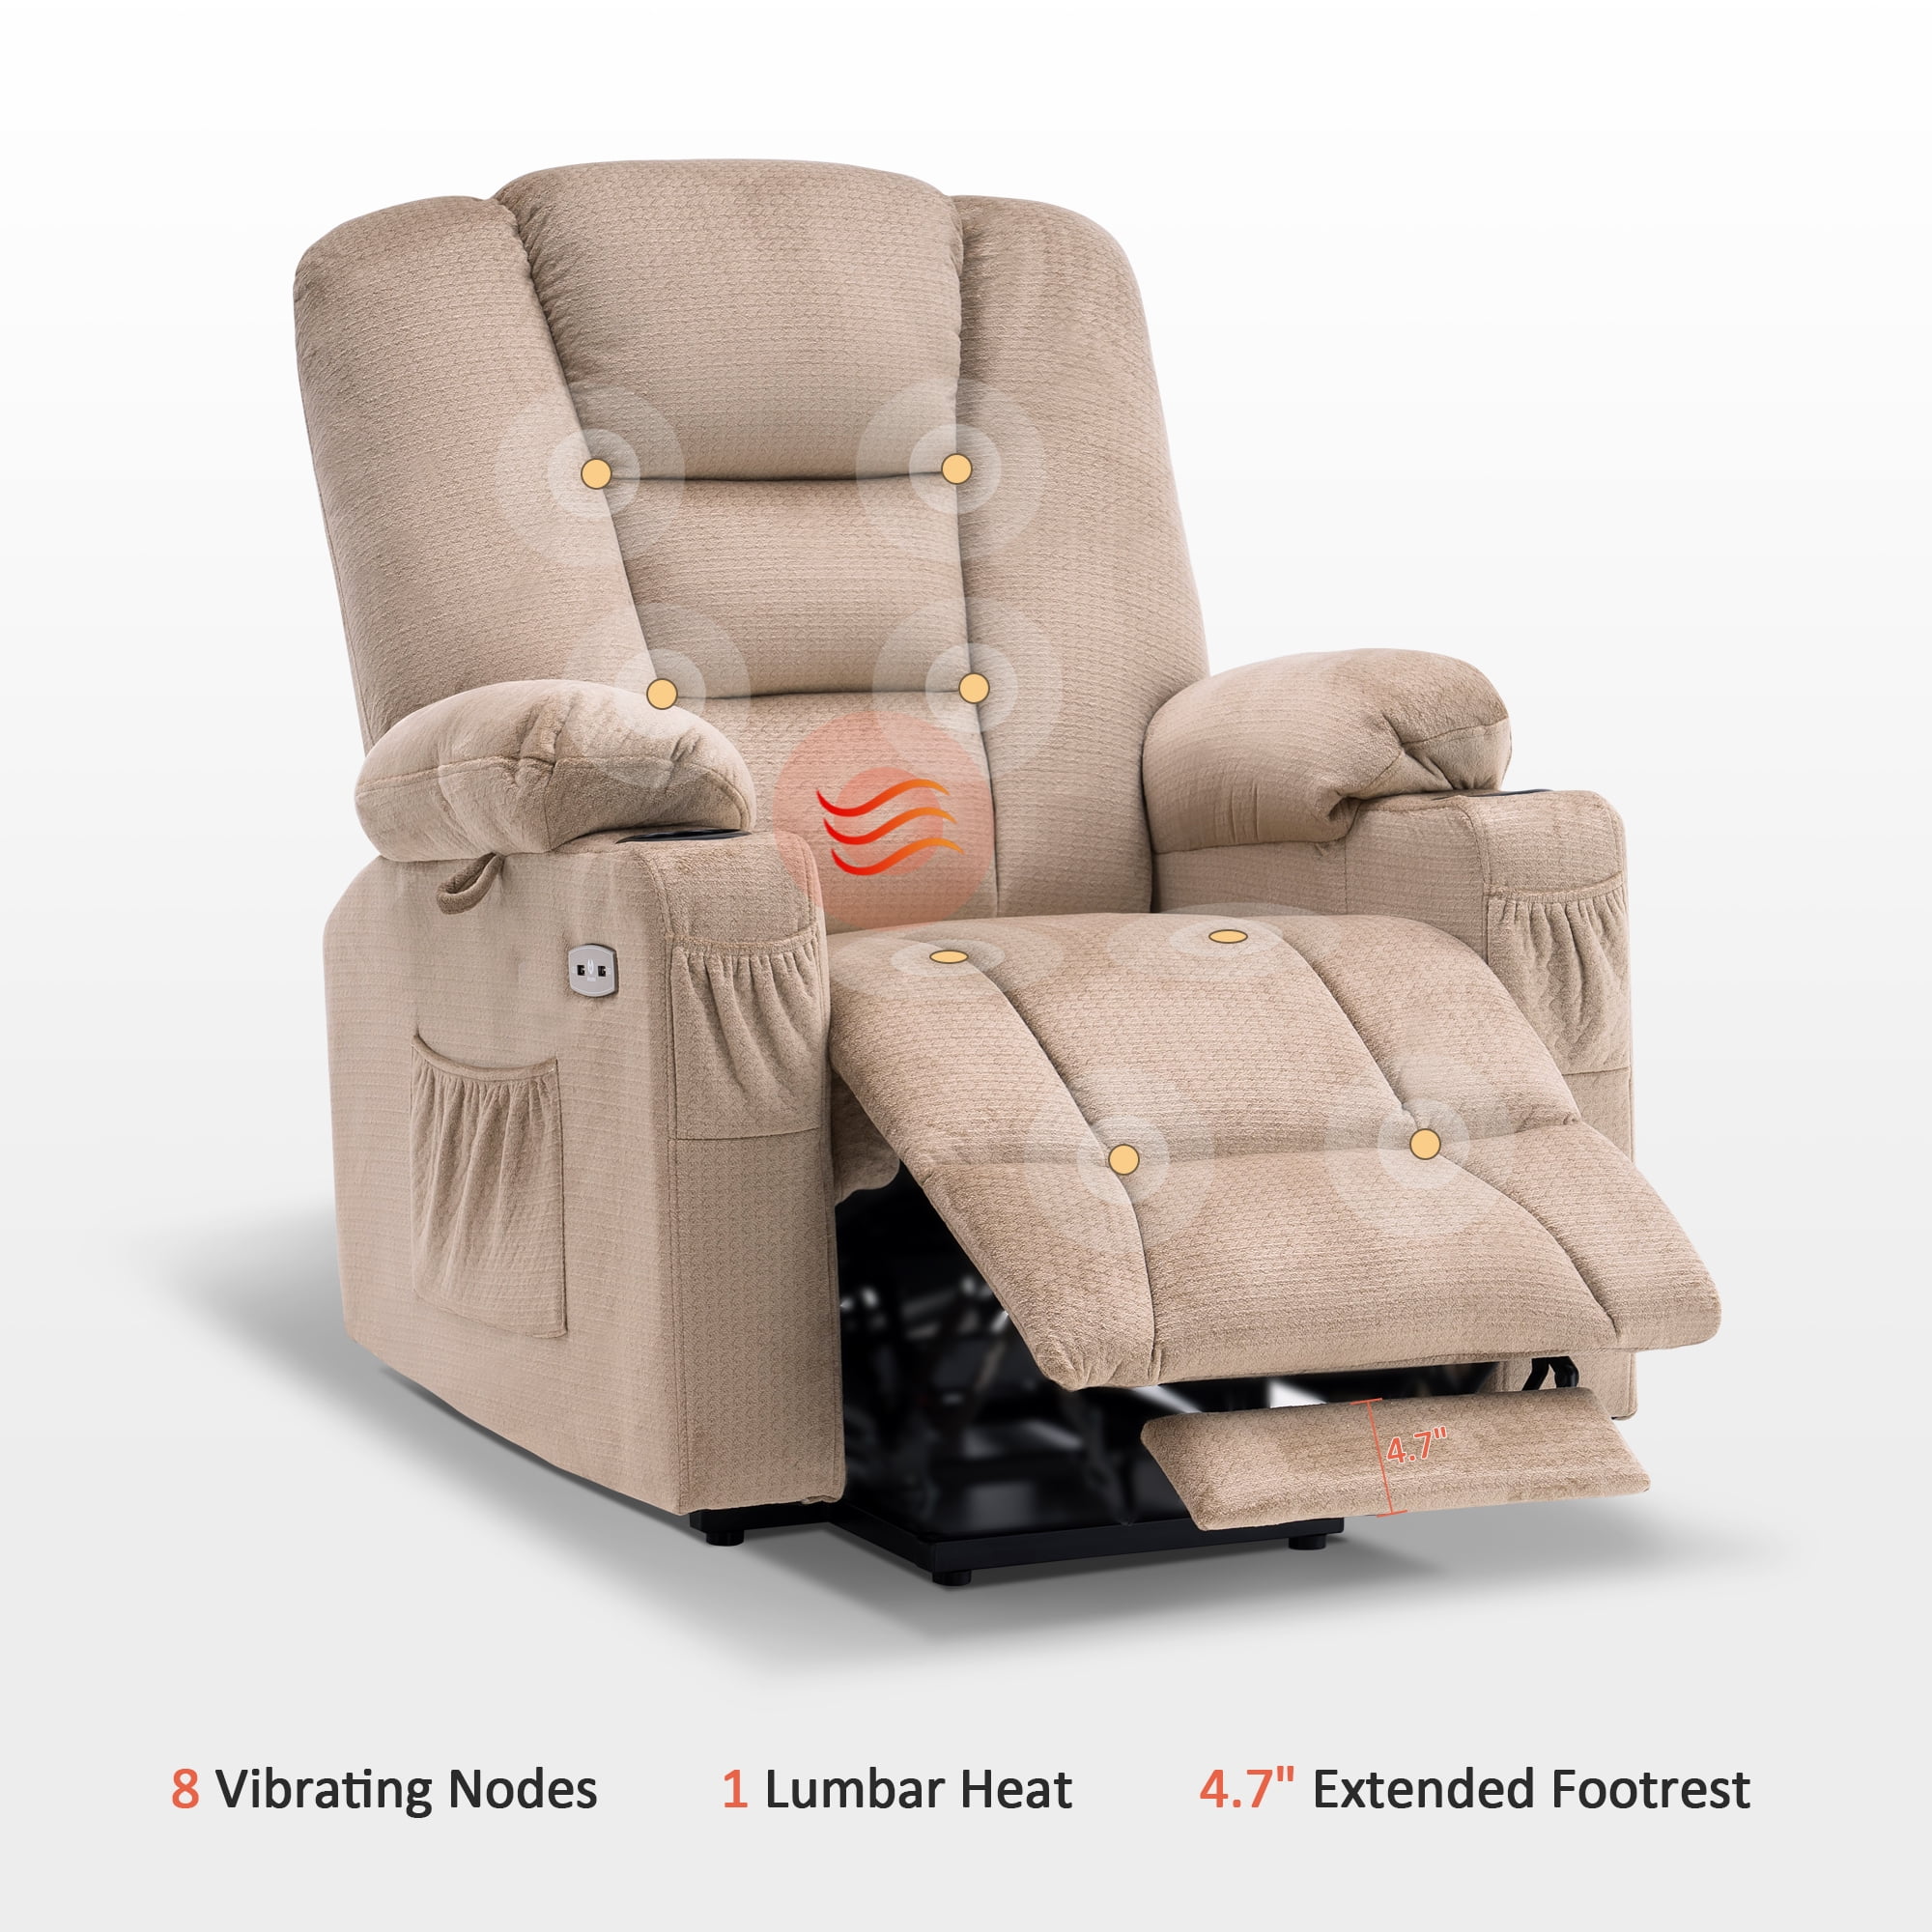 Mcombo Power Lift Recliner Chair Sofa with Massage and Heat for Elderly People, 3 Positions, Control Buttons, USB Charge Port, Fabric 7091